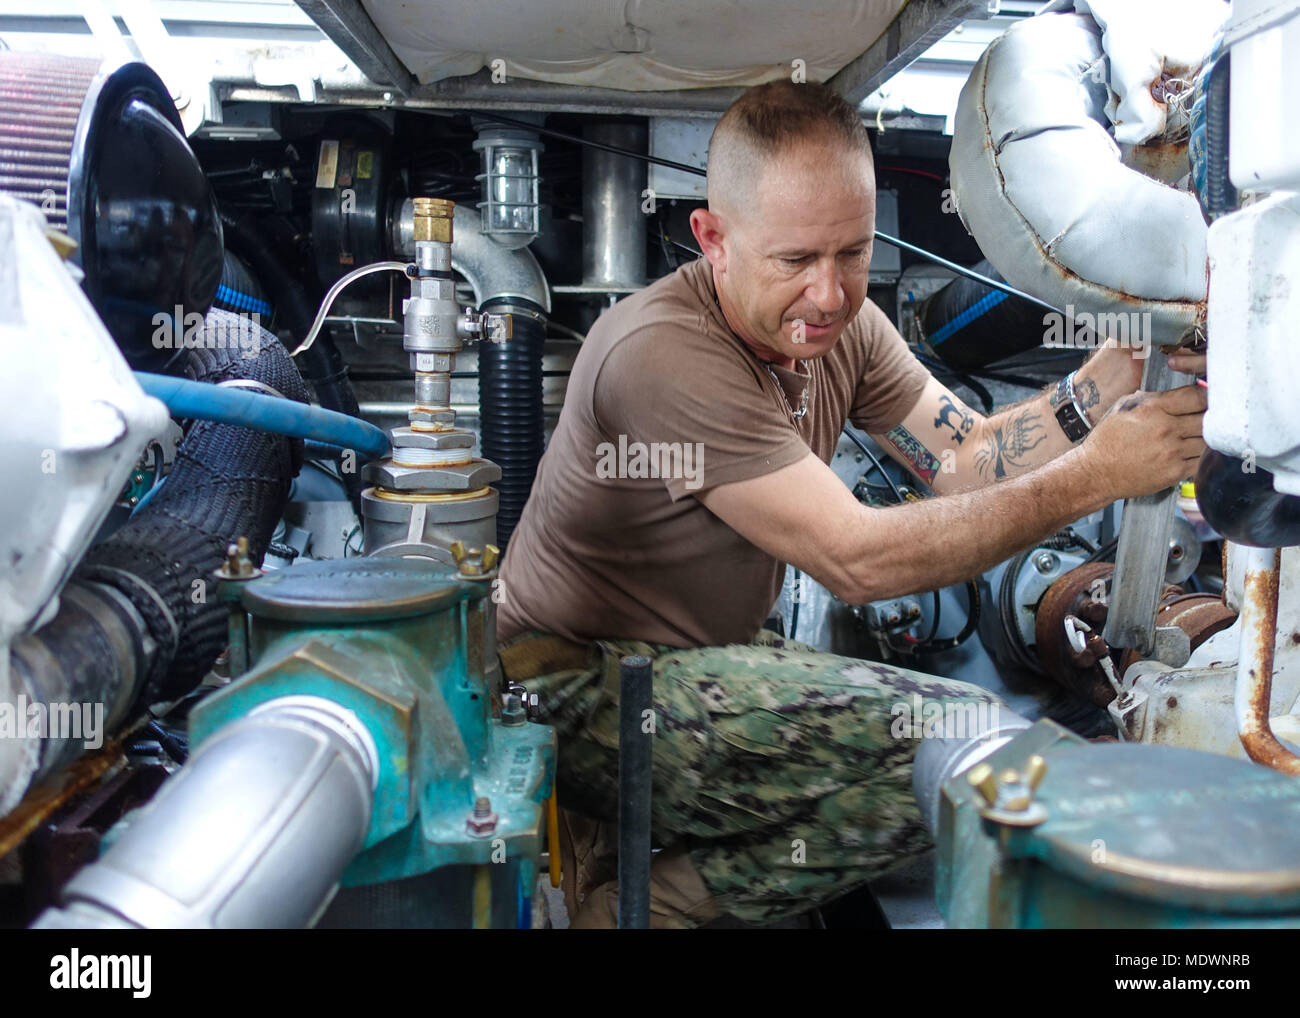 171204-N-FD185-004  CAMP LEMONNIER, Djibouti. (Dec. 6, 2017) Hull Maintenance Technician 1st Class Matthew McCarthy, assigned to Coastal Riverine Squadron (CRS) 10, inspects the engine compartment of a patrol boat prior to underway operations. CRS-10 is forward-deployed to the U.S. 6th Fleet area of operations and conducts joint and naval operations, often in concert with allied and interagency partners, in order to advance U.S. national interests and security and stability in Europe and Africa. (U.S. Navy photo by Engineman 2nd Class Carlos A. Monsalve/Released) Stock Photo